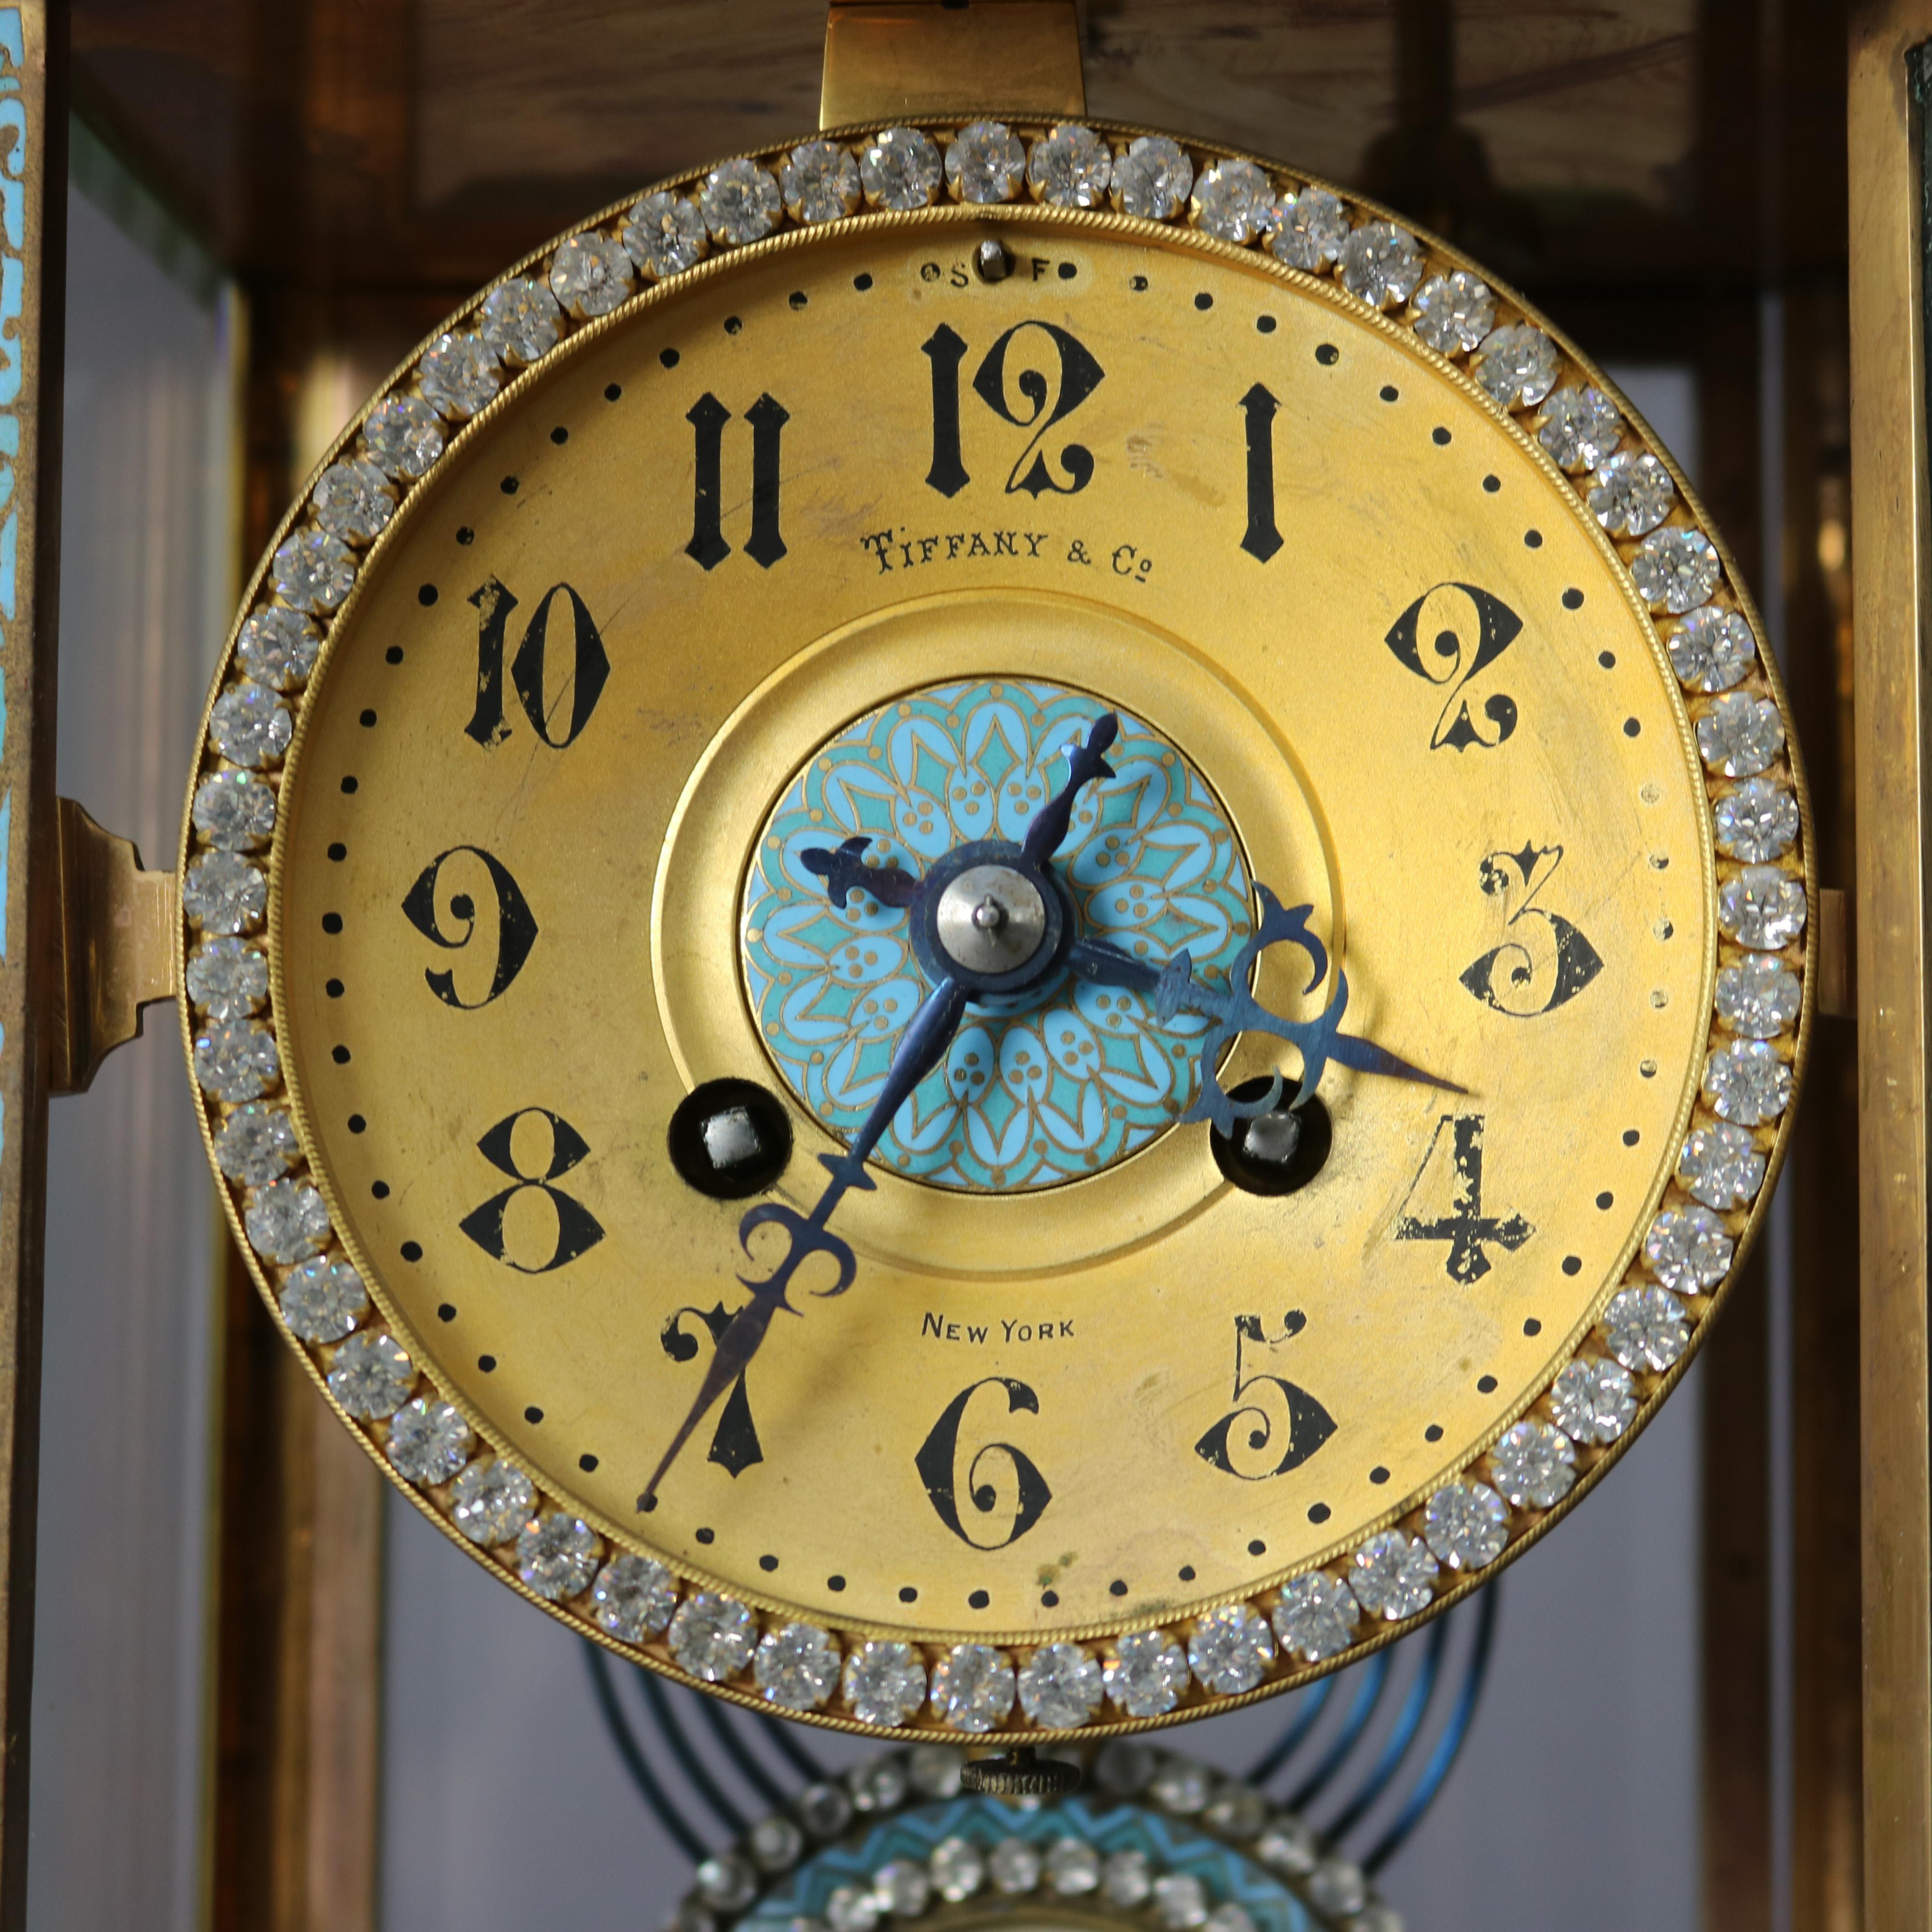 An antique crystal regulator clock by Tiffany offers enameled bow-front frame with rhinestone accents and portrait pendulum, maker mark as photographed, c1900

Measures - 11.75